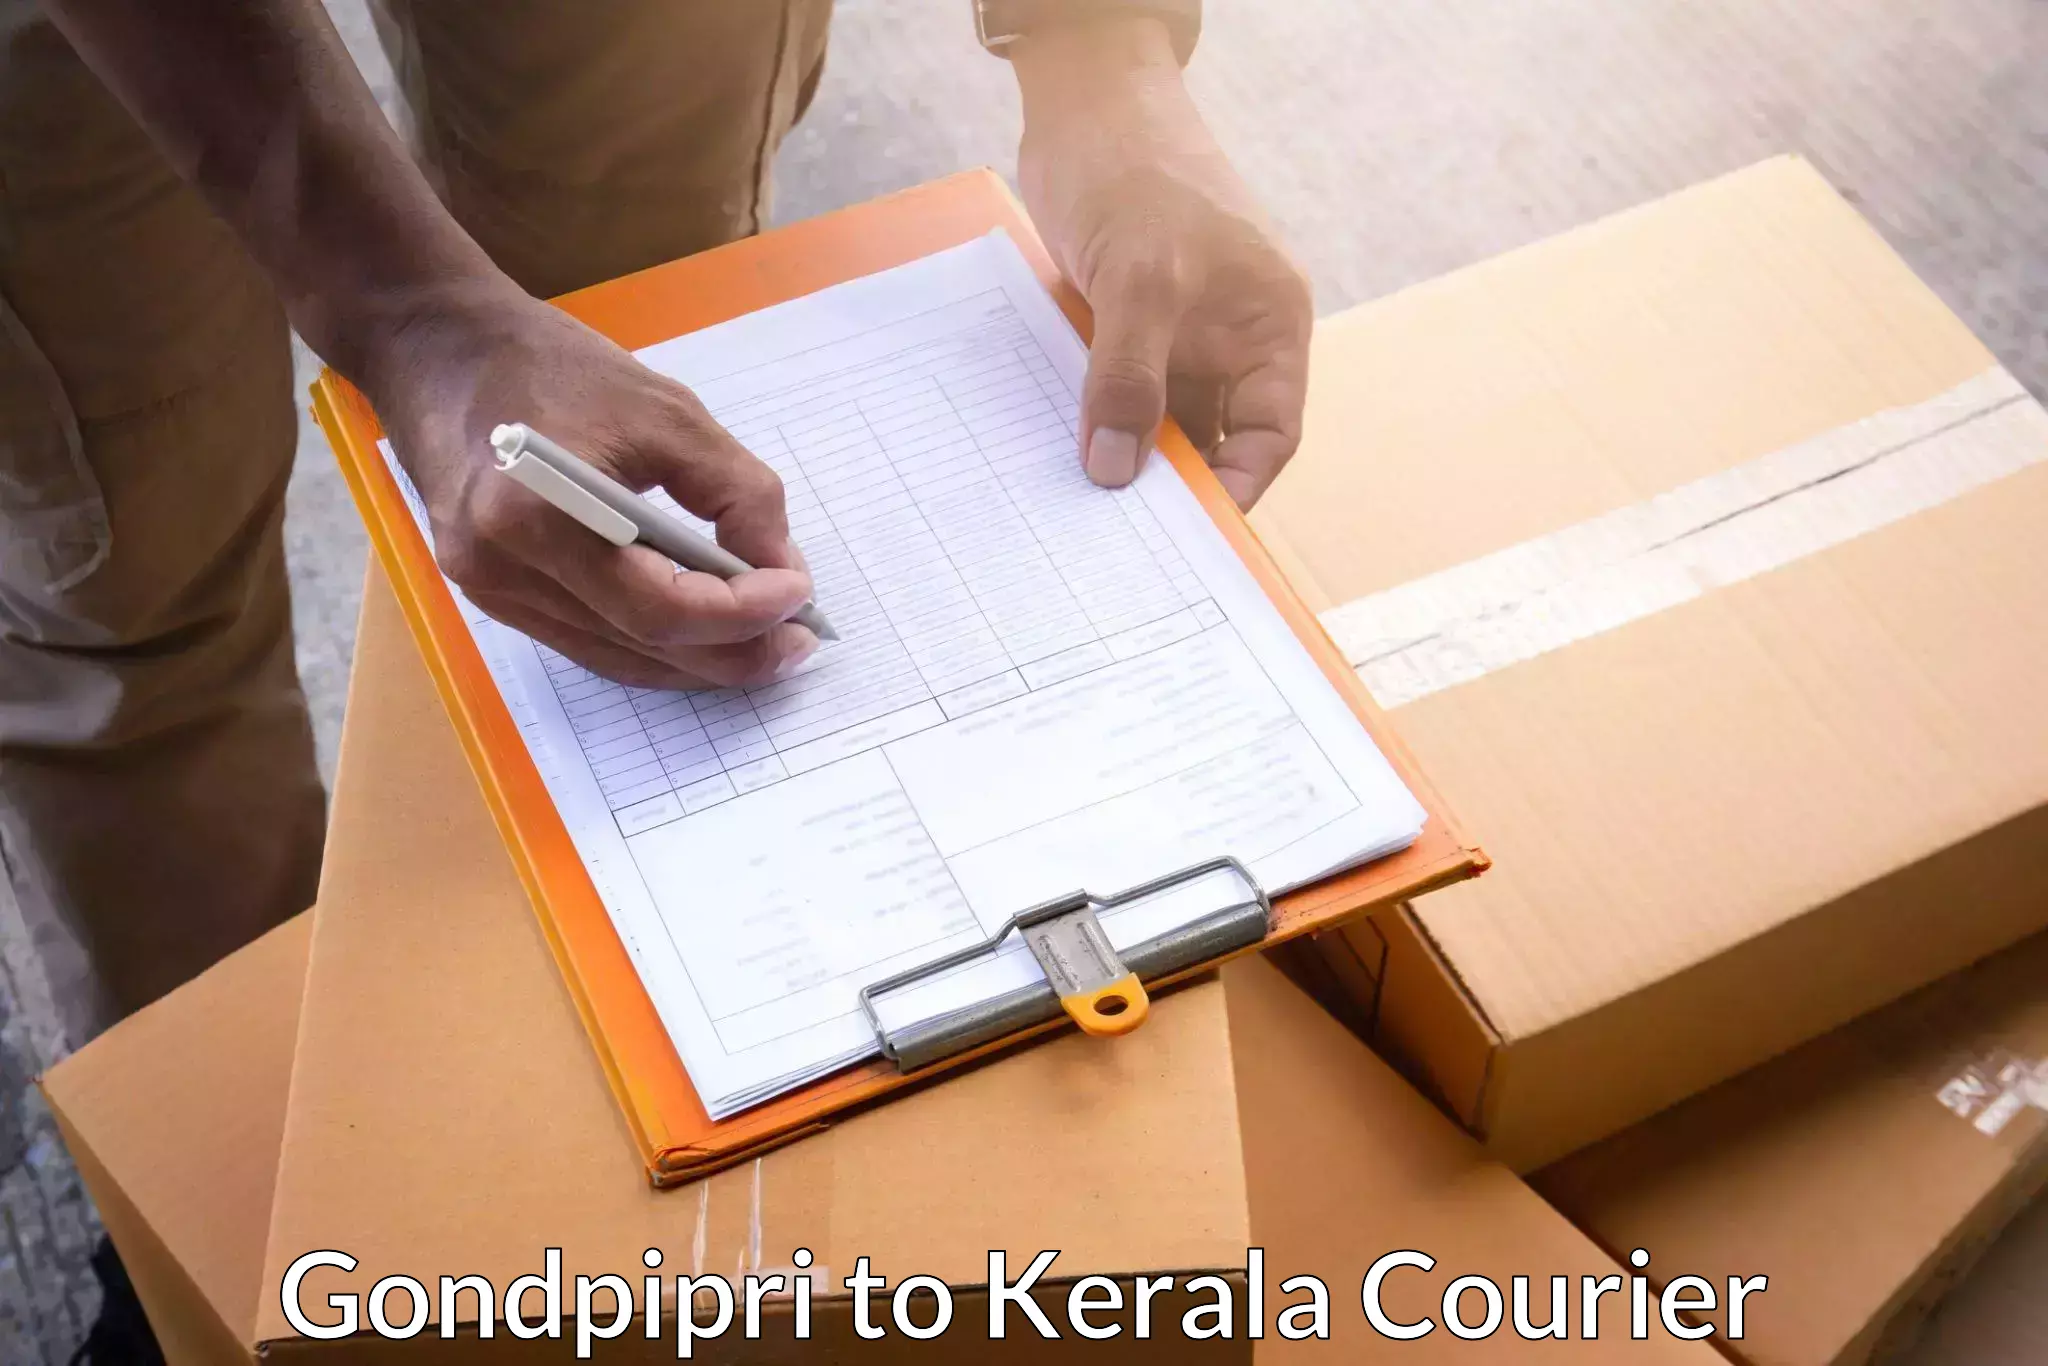 State-of-the-art courier technology in Gondpipri to Nochad